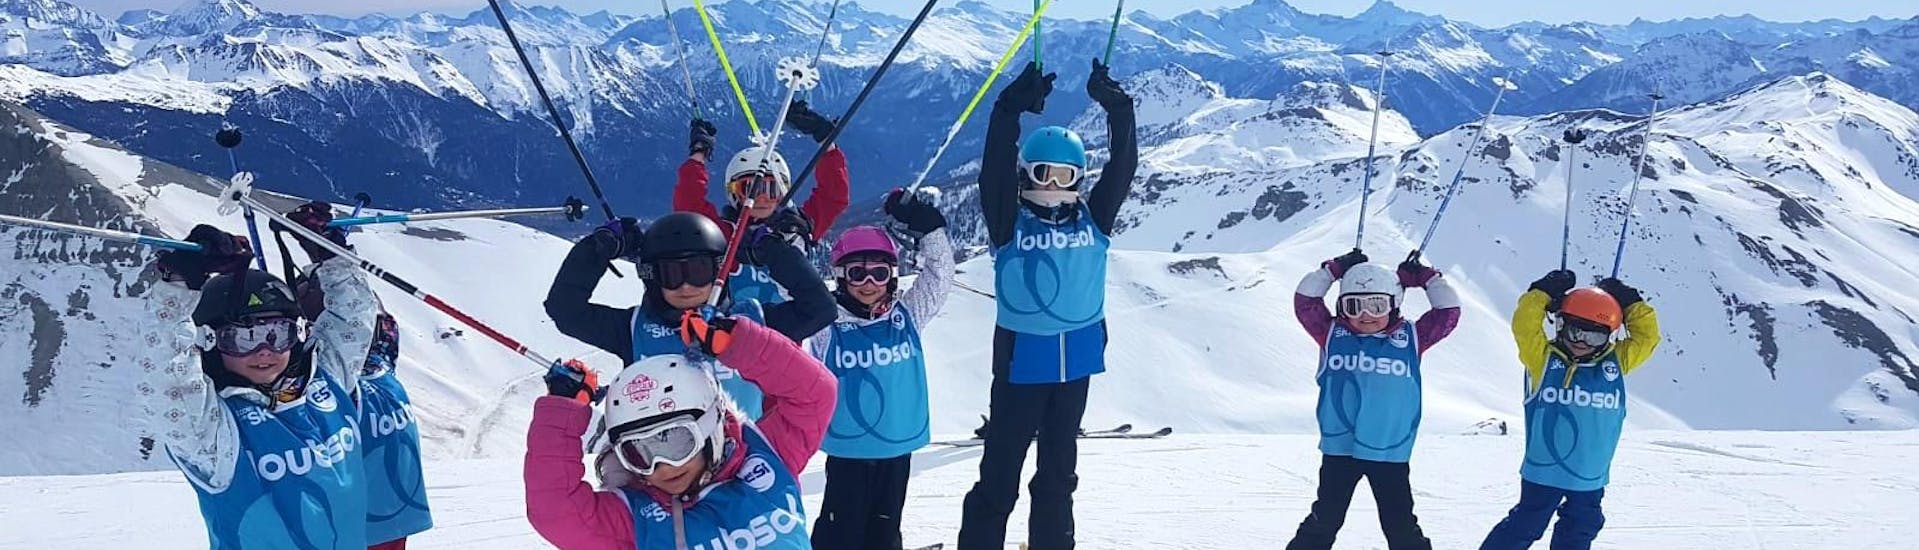 Kids Ski Lessons (6-11 y.) for All Levels.